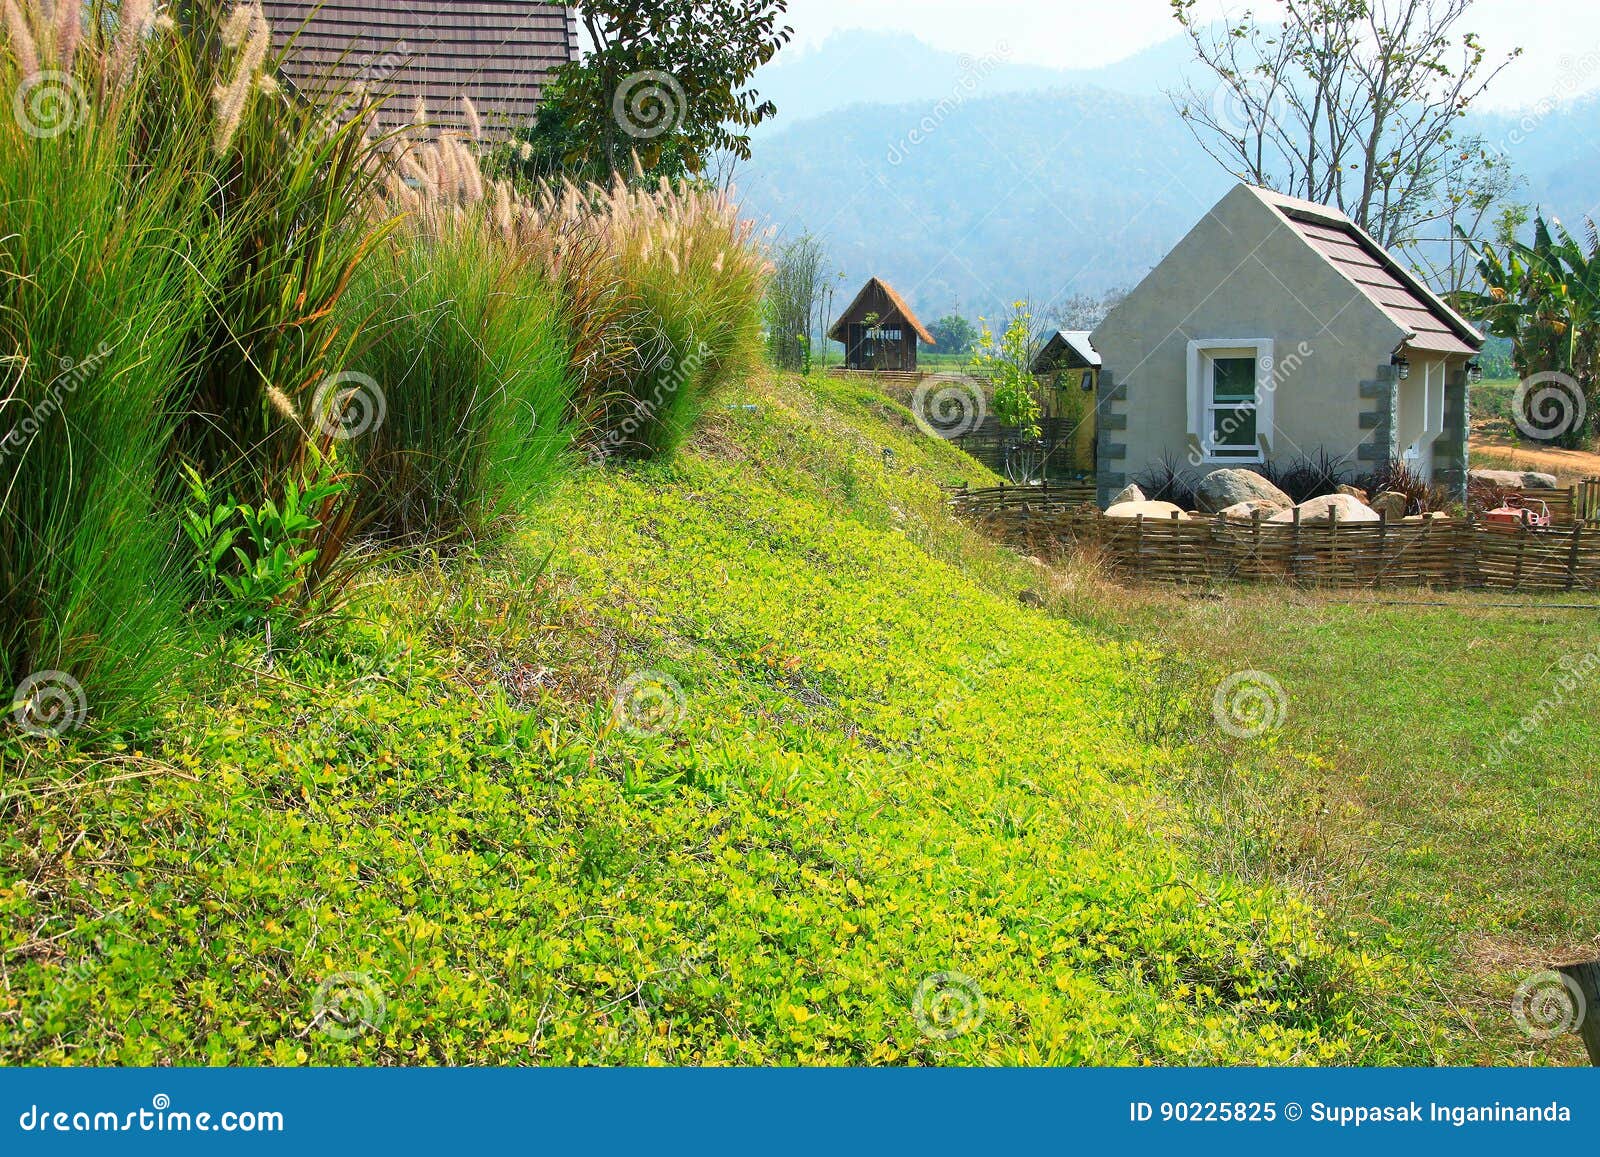 Small house in nature. stock image. Image of nature, garden - 90225825